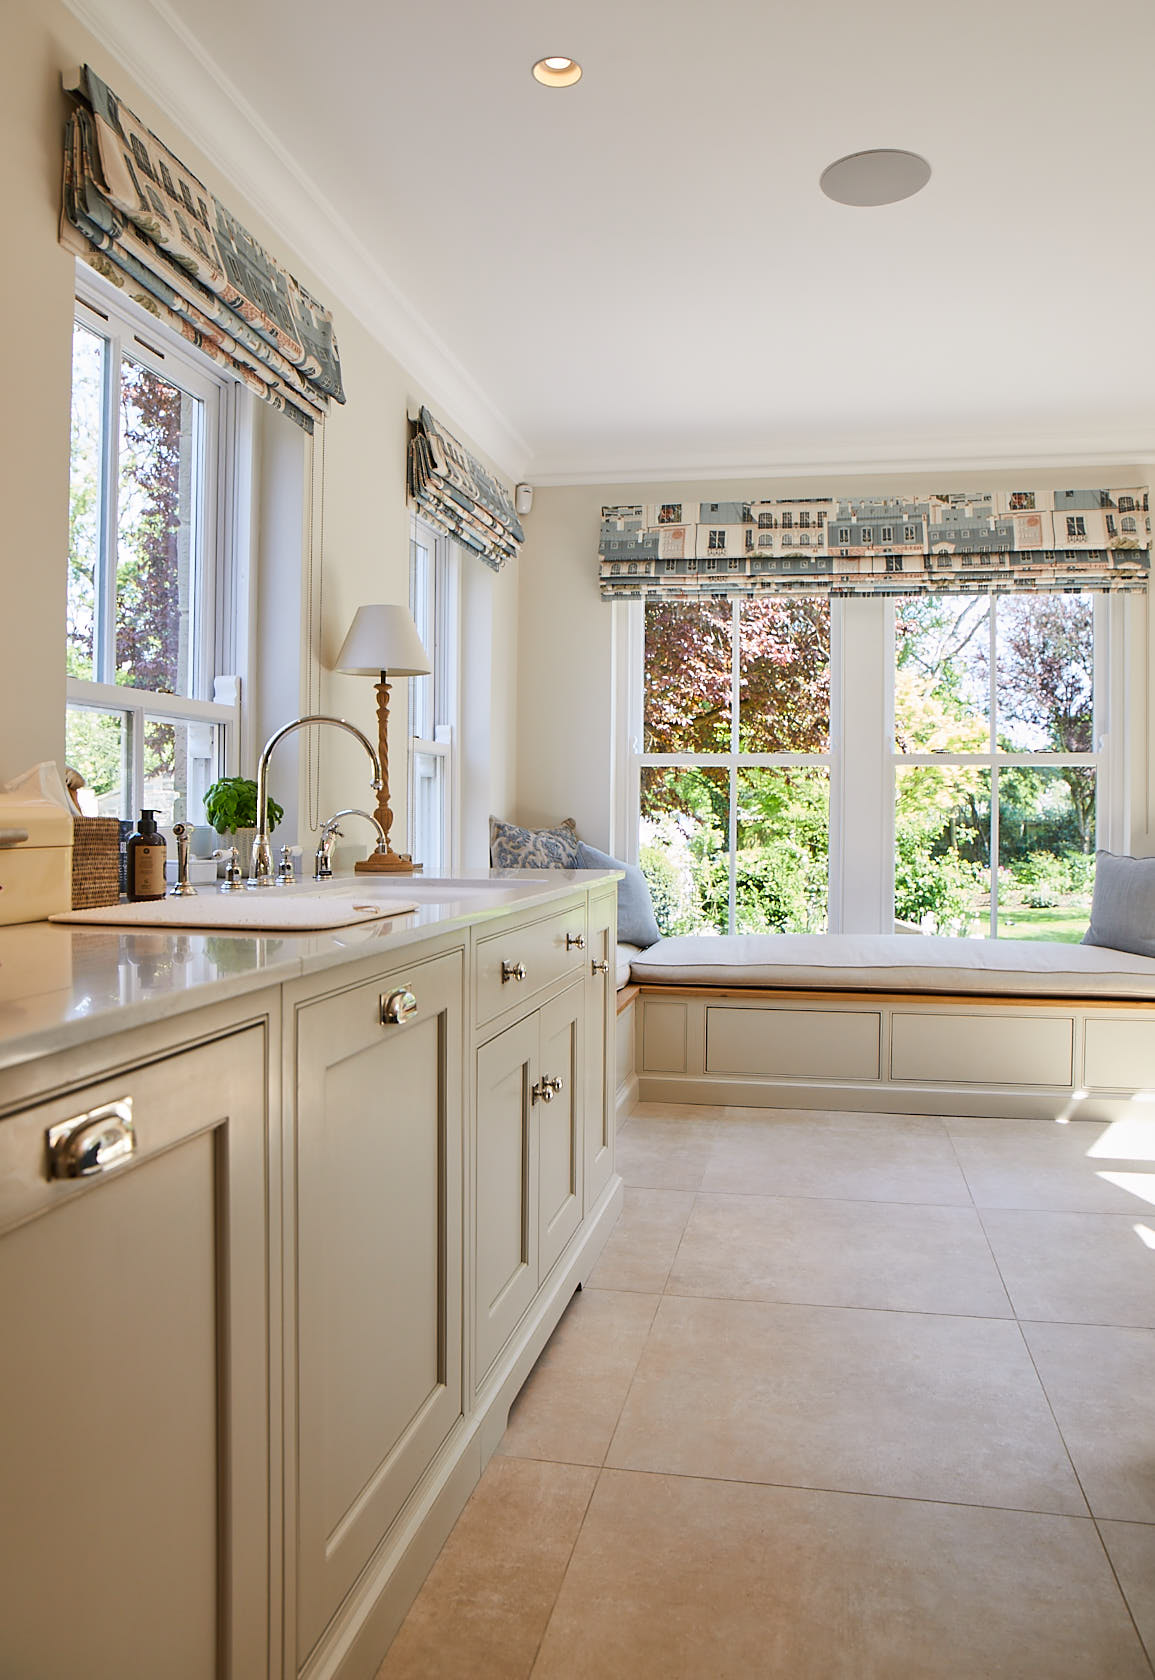 Traditional painted kitchen units with integrated ceramic sink and window seat